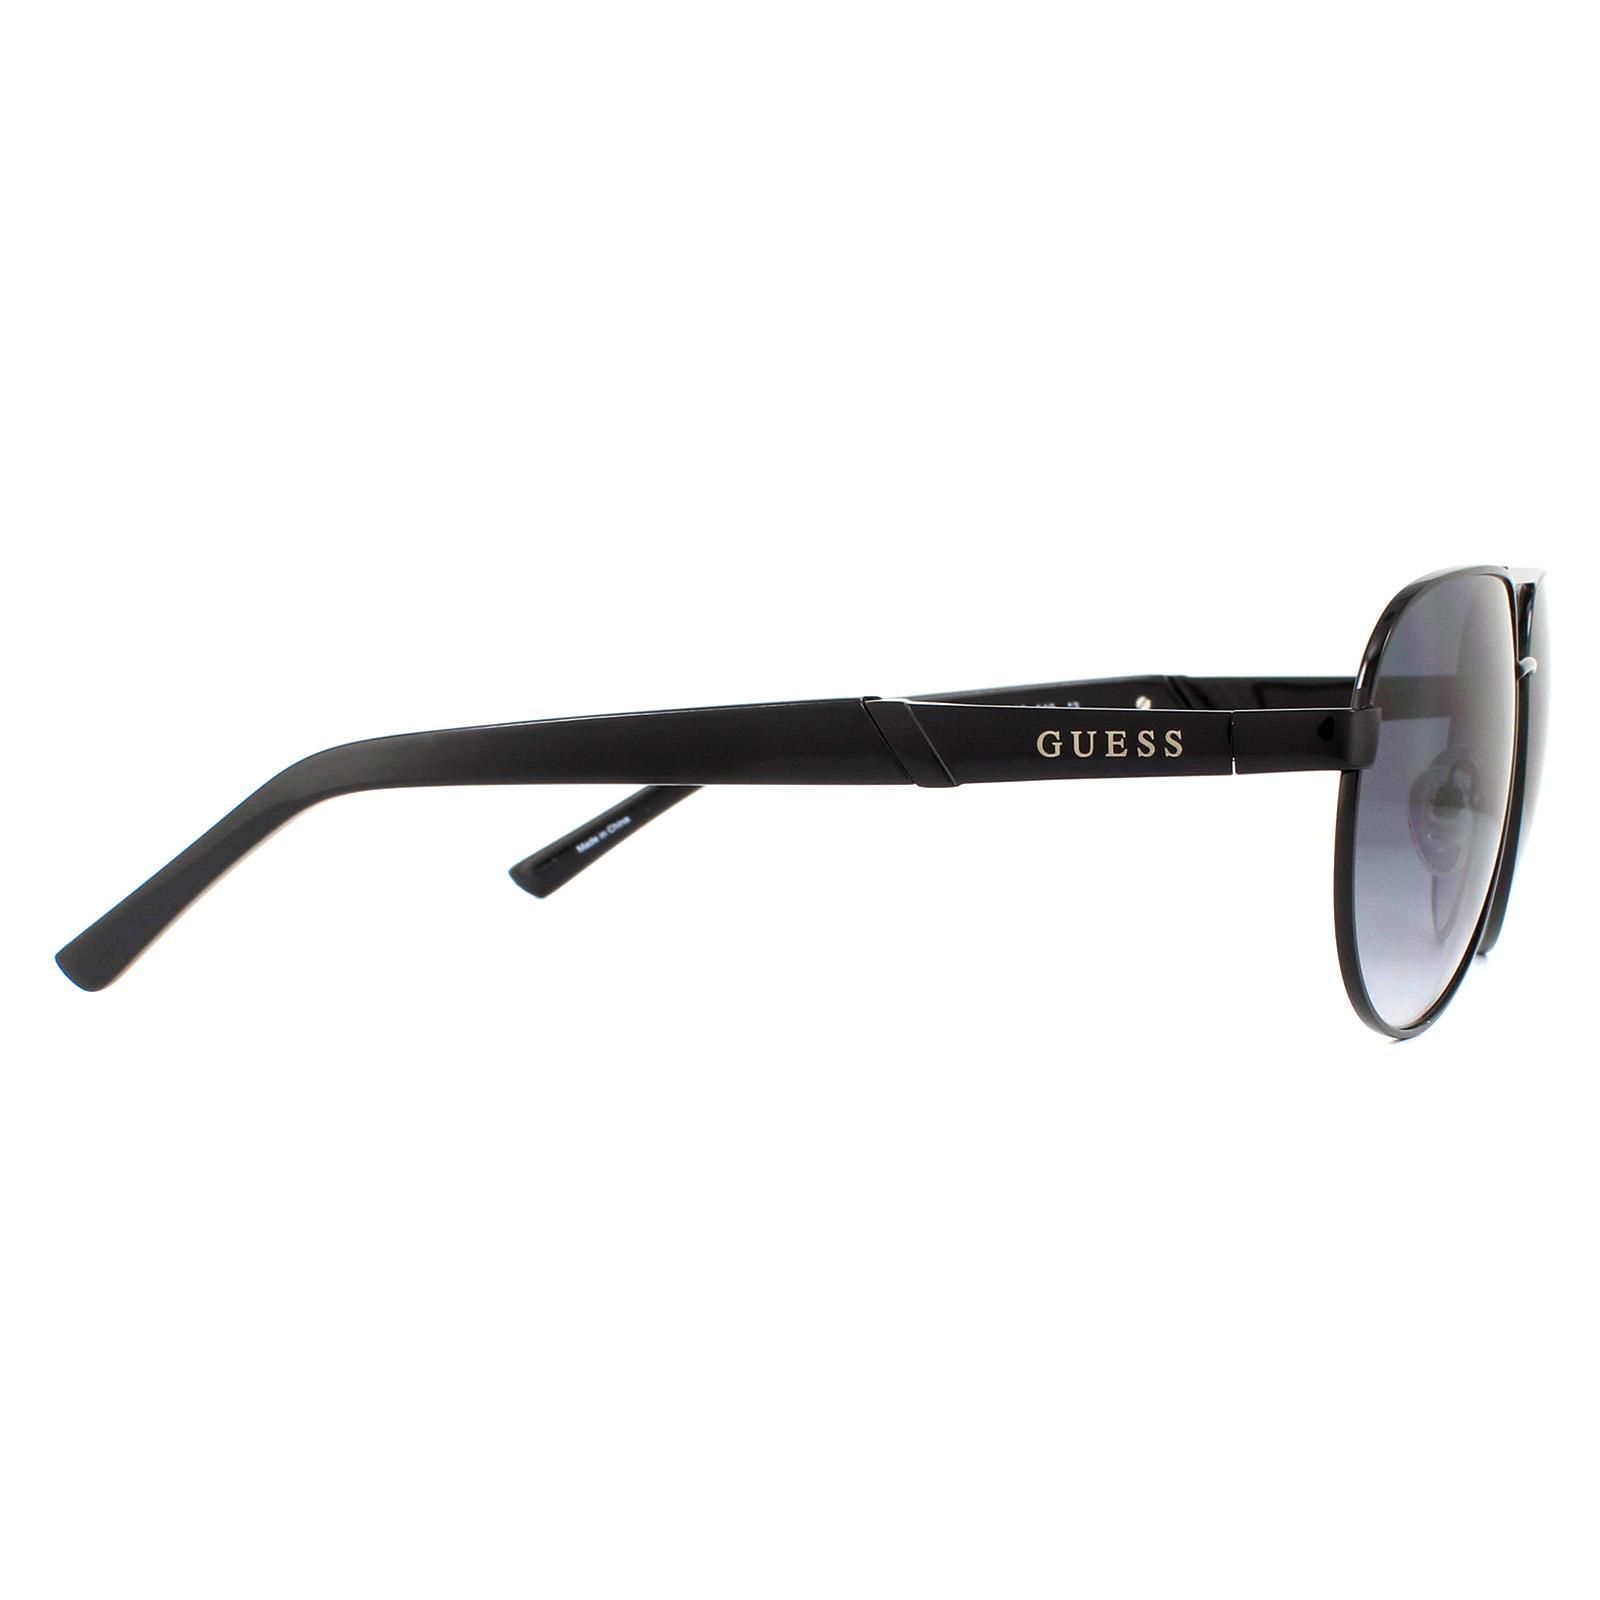 Guess Sunglasses GF5031 01B Black Grey Gradient are a stylish pilot style with a sold metal frame which then merges diagonally, halfway down the arms after the Guess logo, into plastic temple tips.